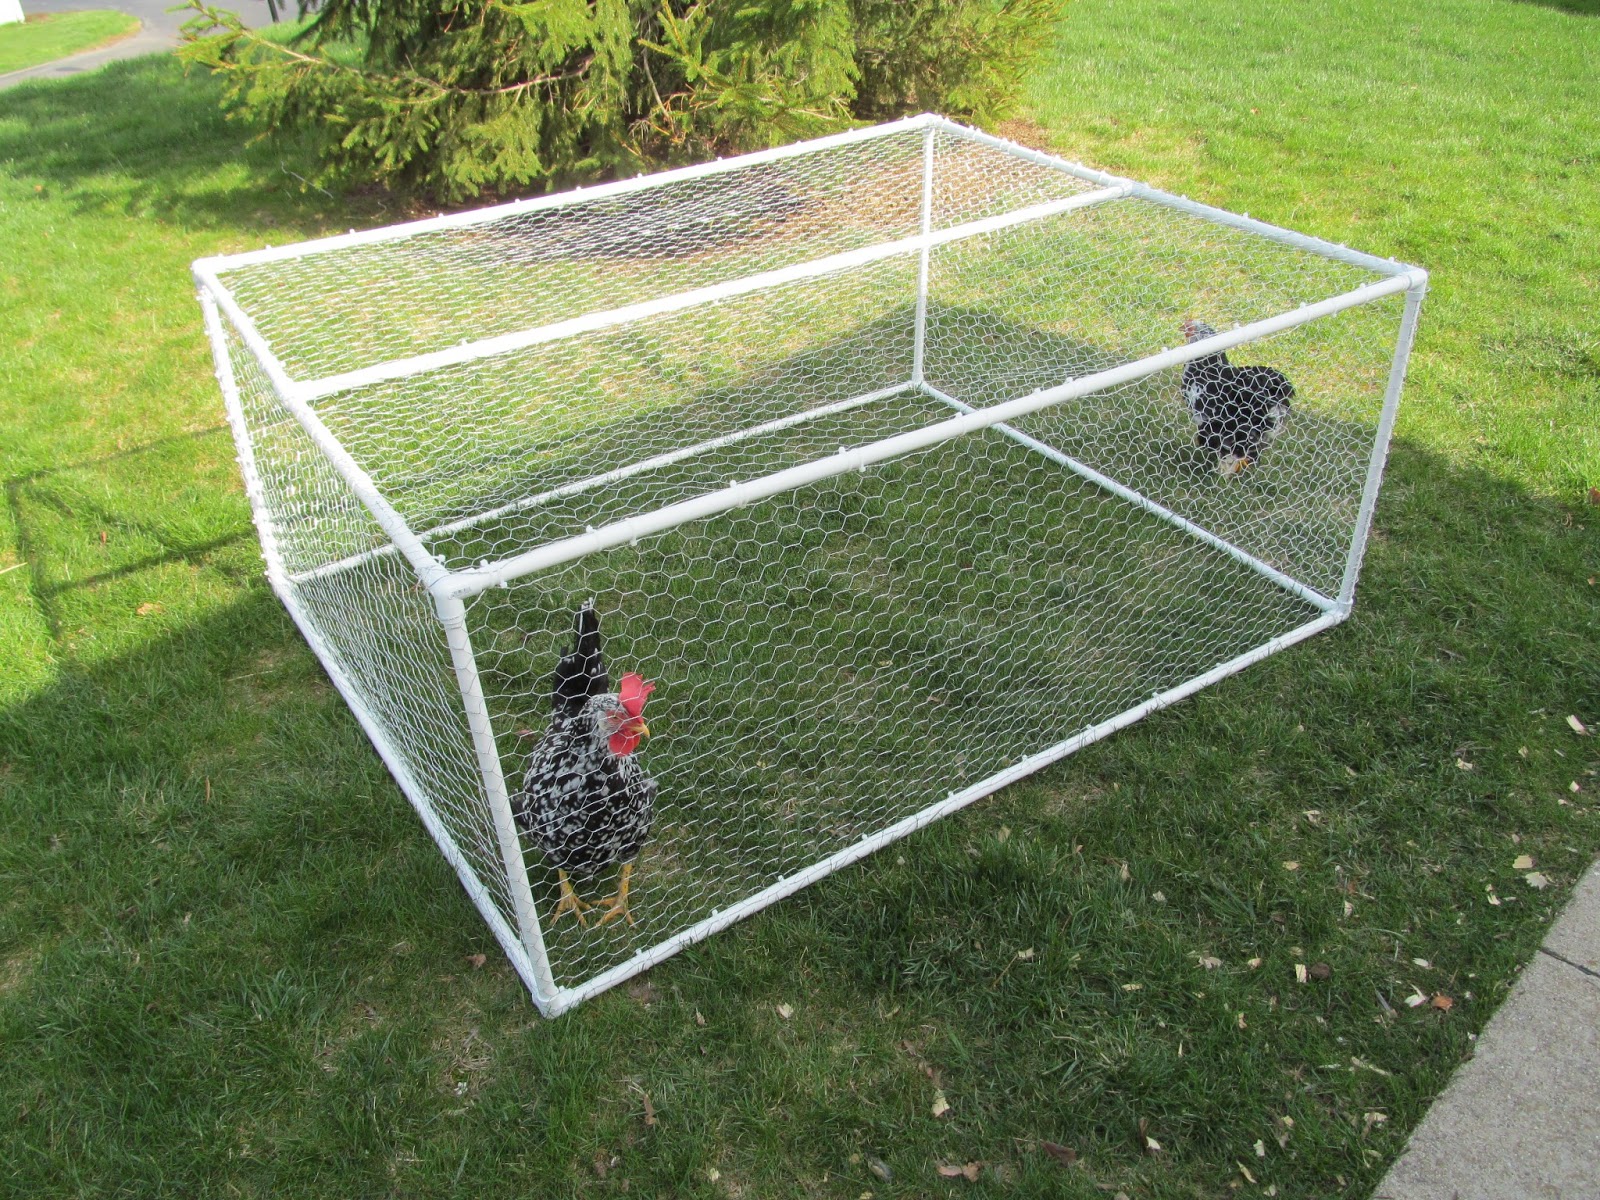  : Plans for a portable, light weight, chicken run for less than $30